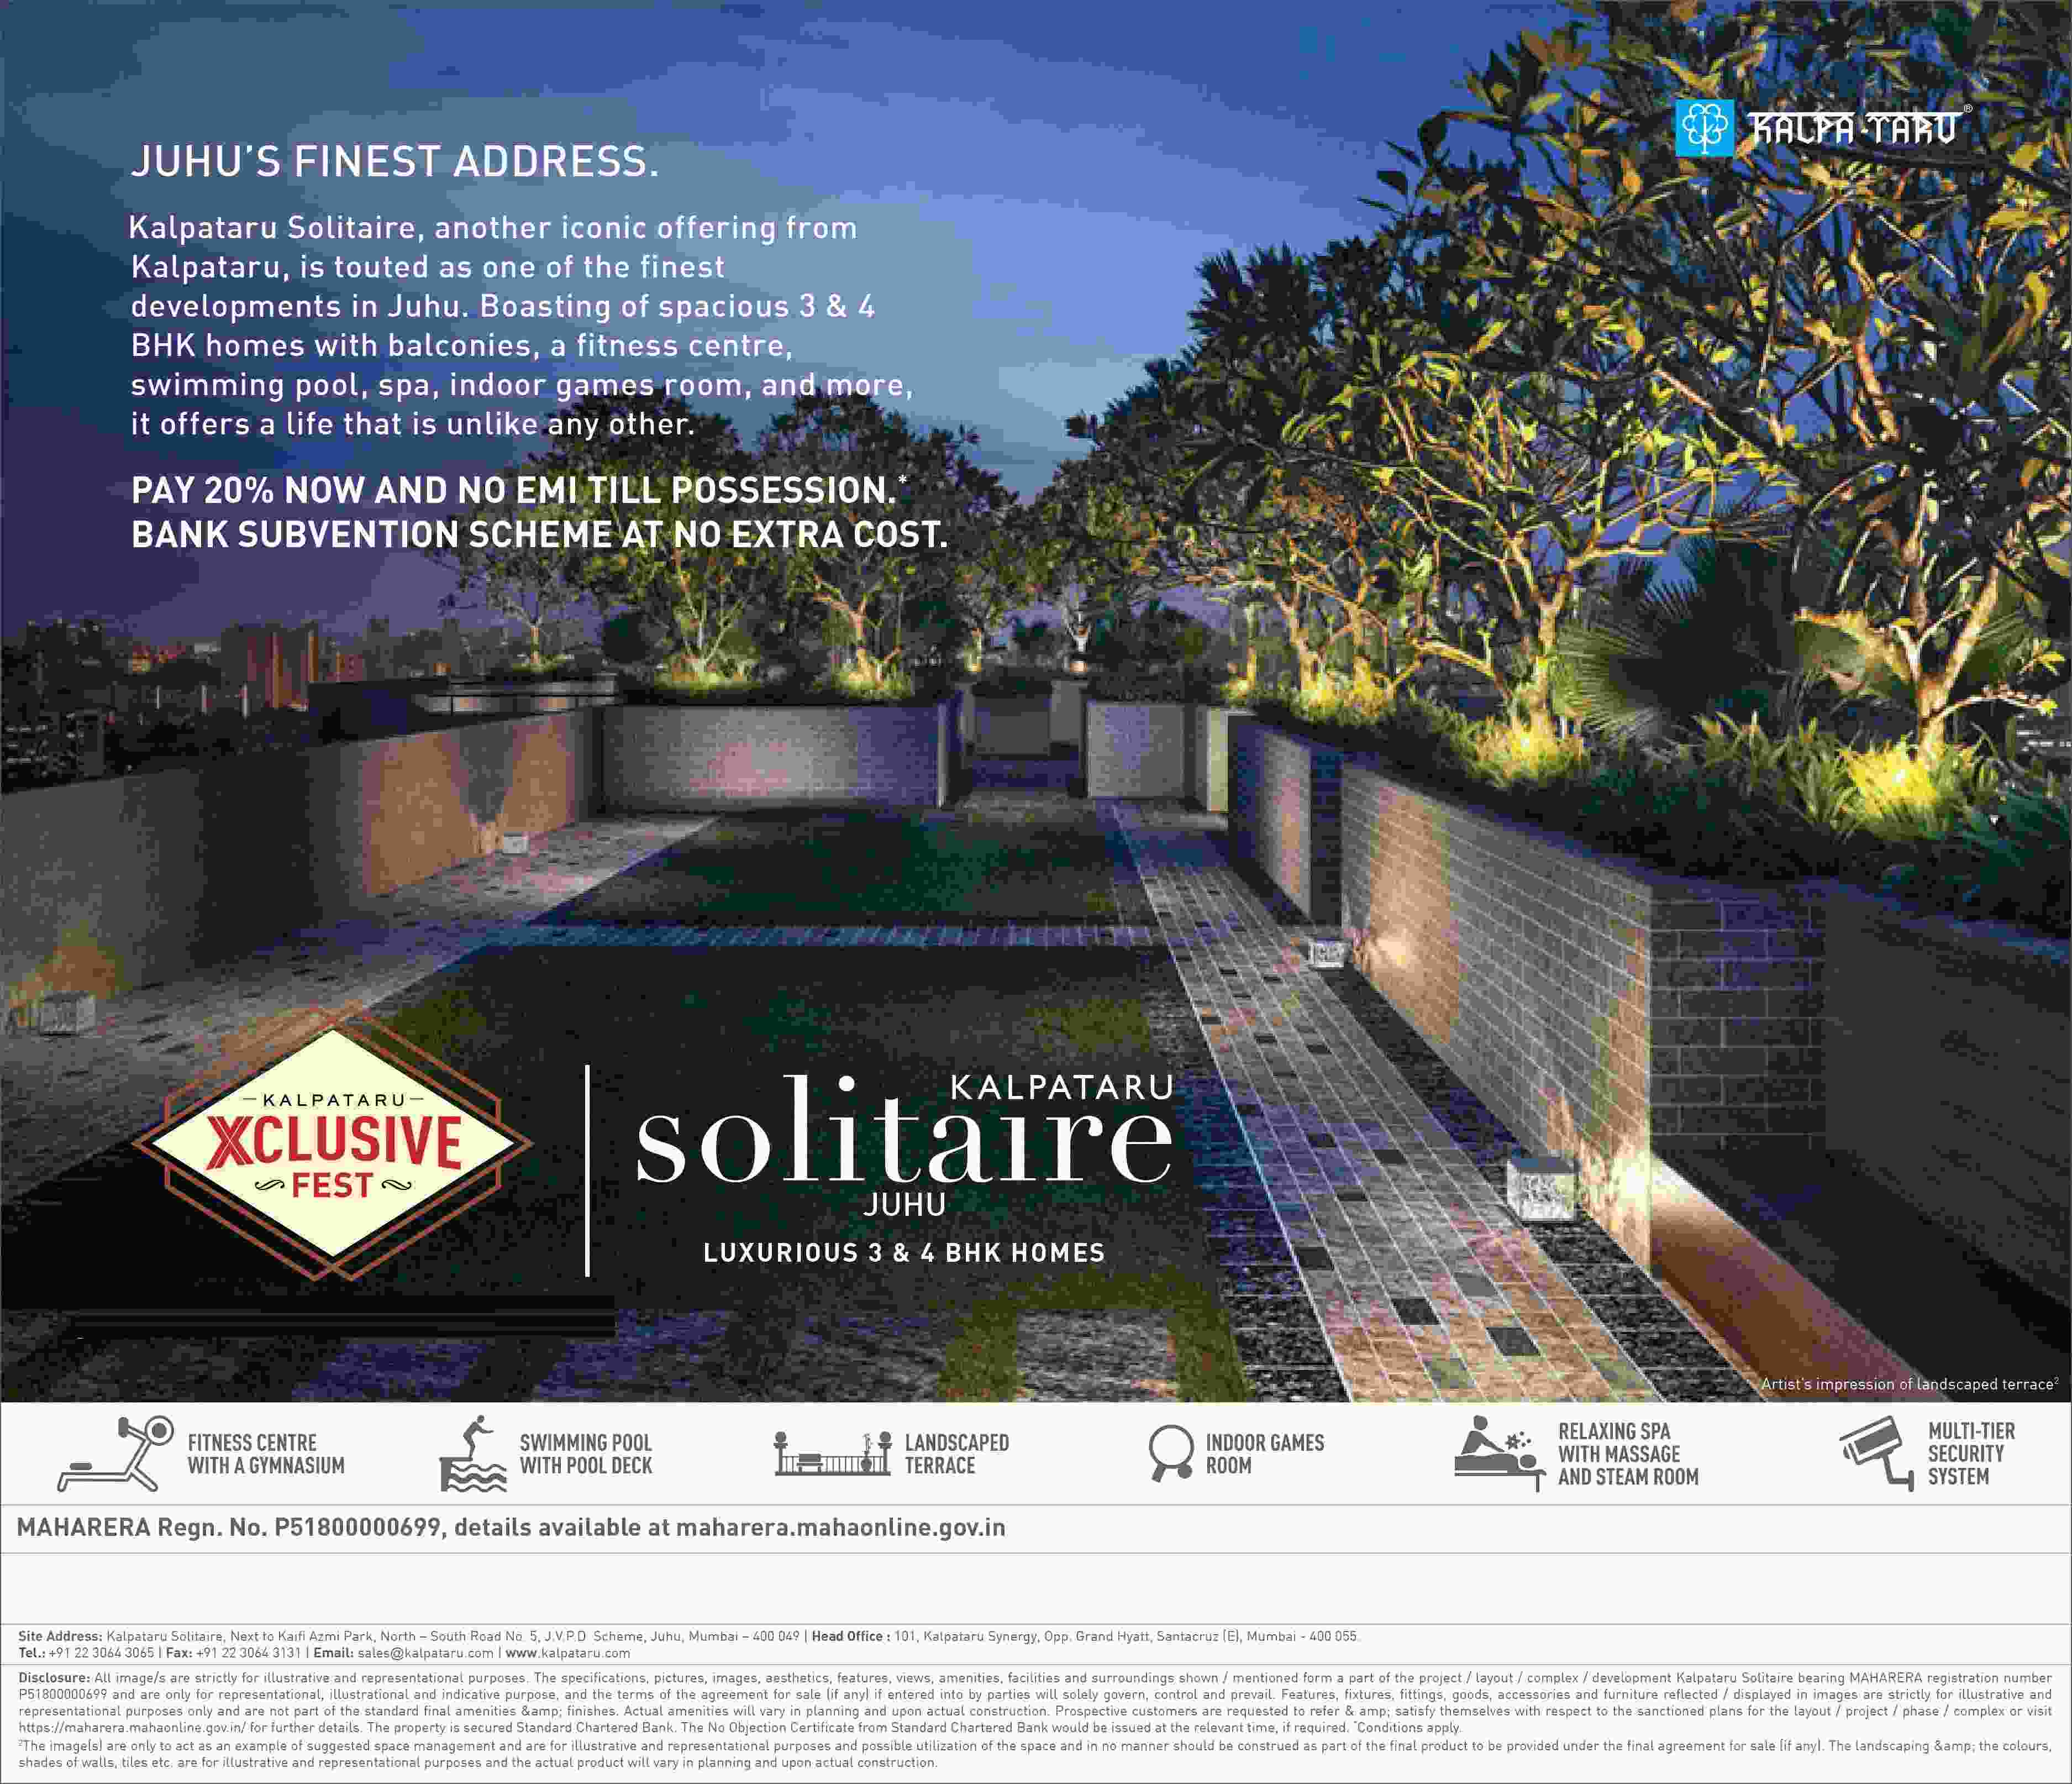 Pay 20% now and no EMI till possession at Kalpataru Solitaire in Mumbai